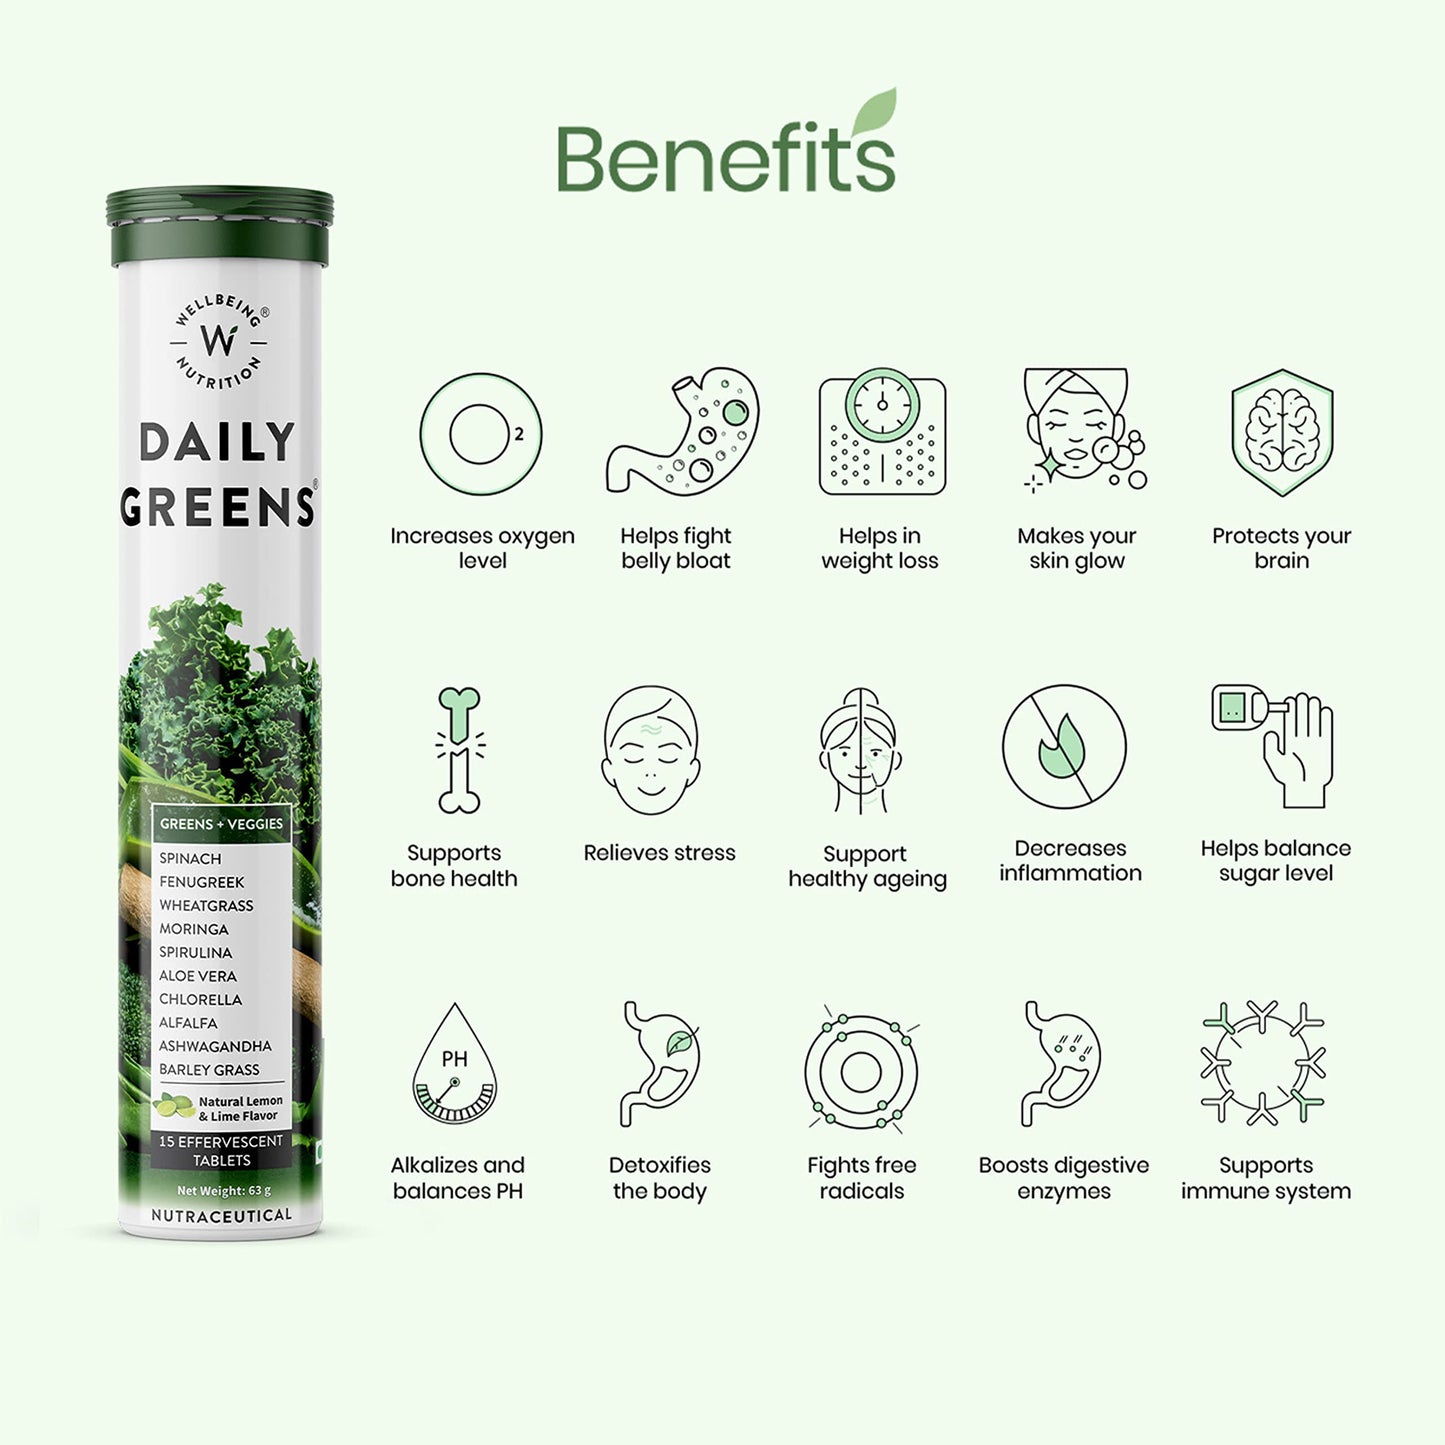 Wellbeing Nutrition Daily Greens, Wholefood Multivitamin with Vitamin C, Zinc, B6, B12, Iron for Immunity and Detox with 39+ Organic Certified Plant Superfoods & Antioxidants(15 Effervescent Tablets)